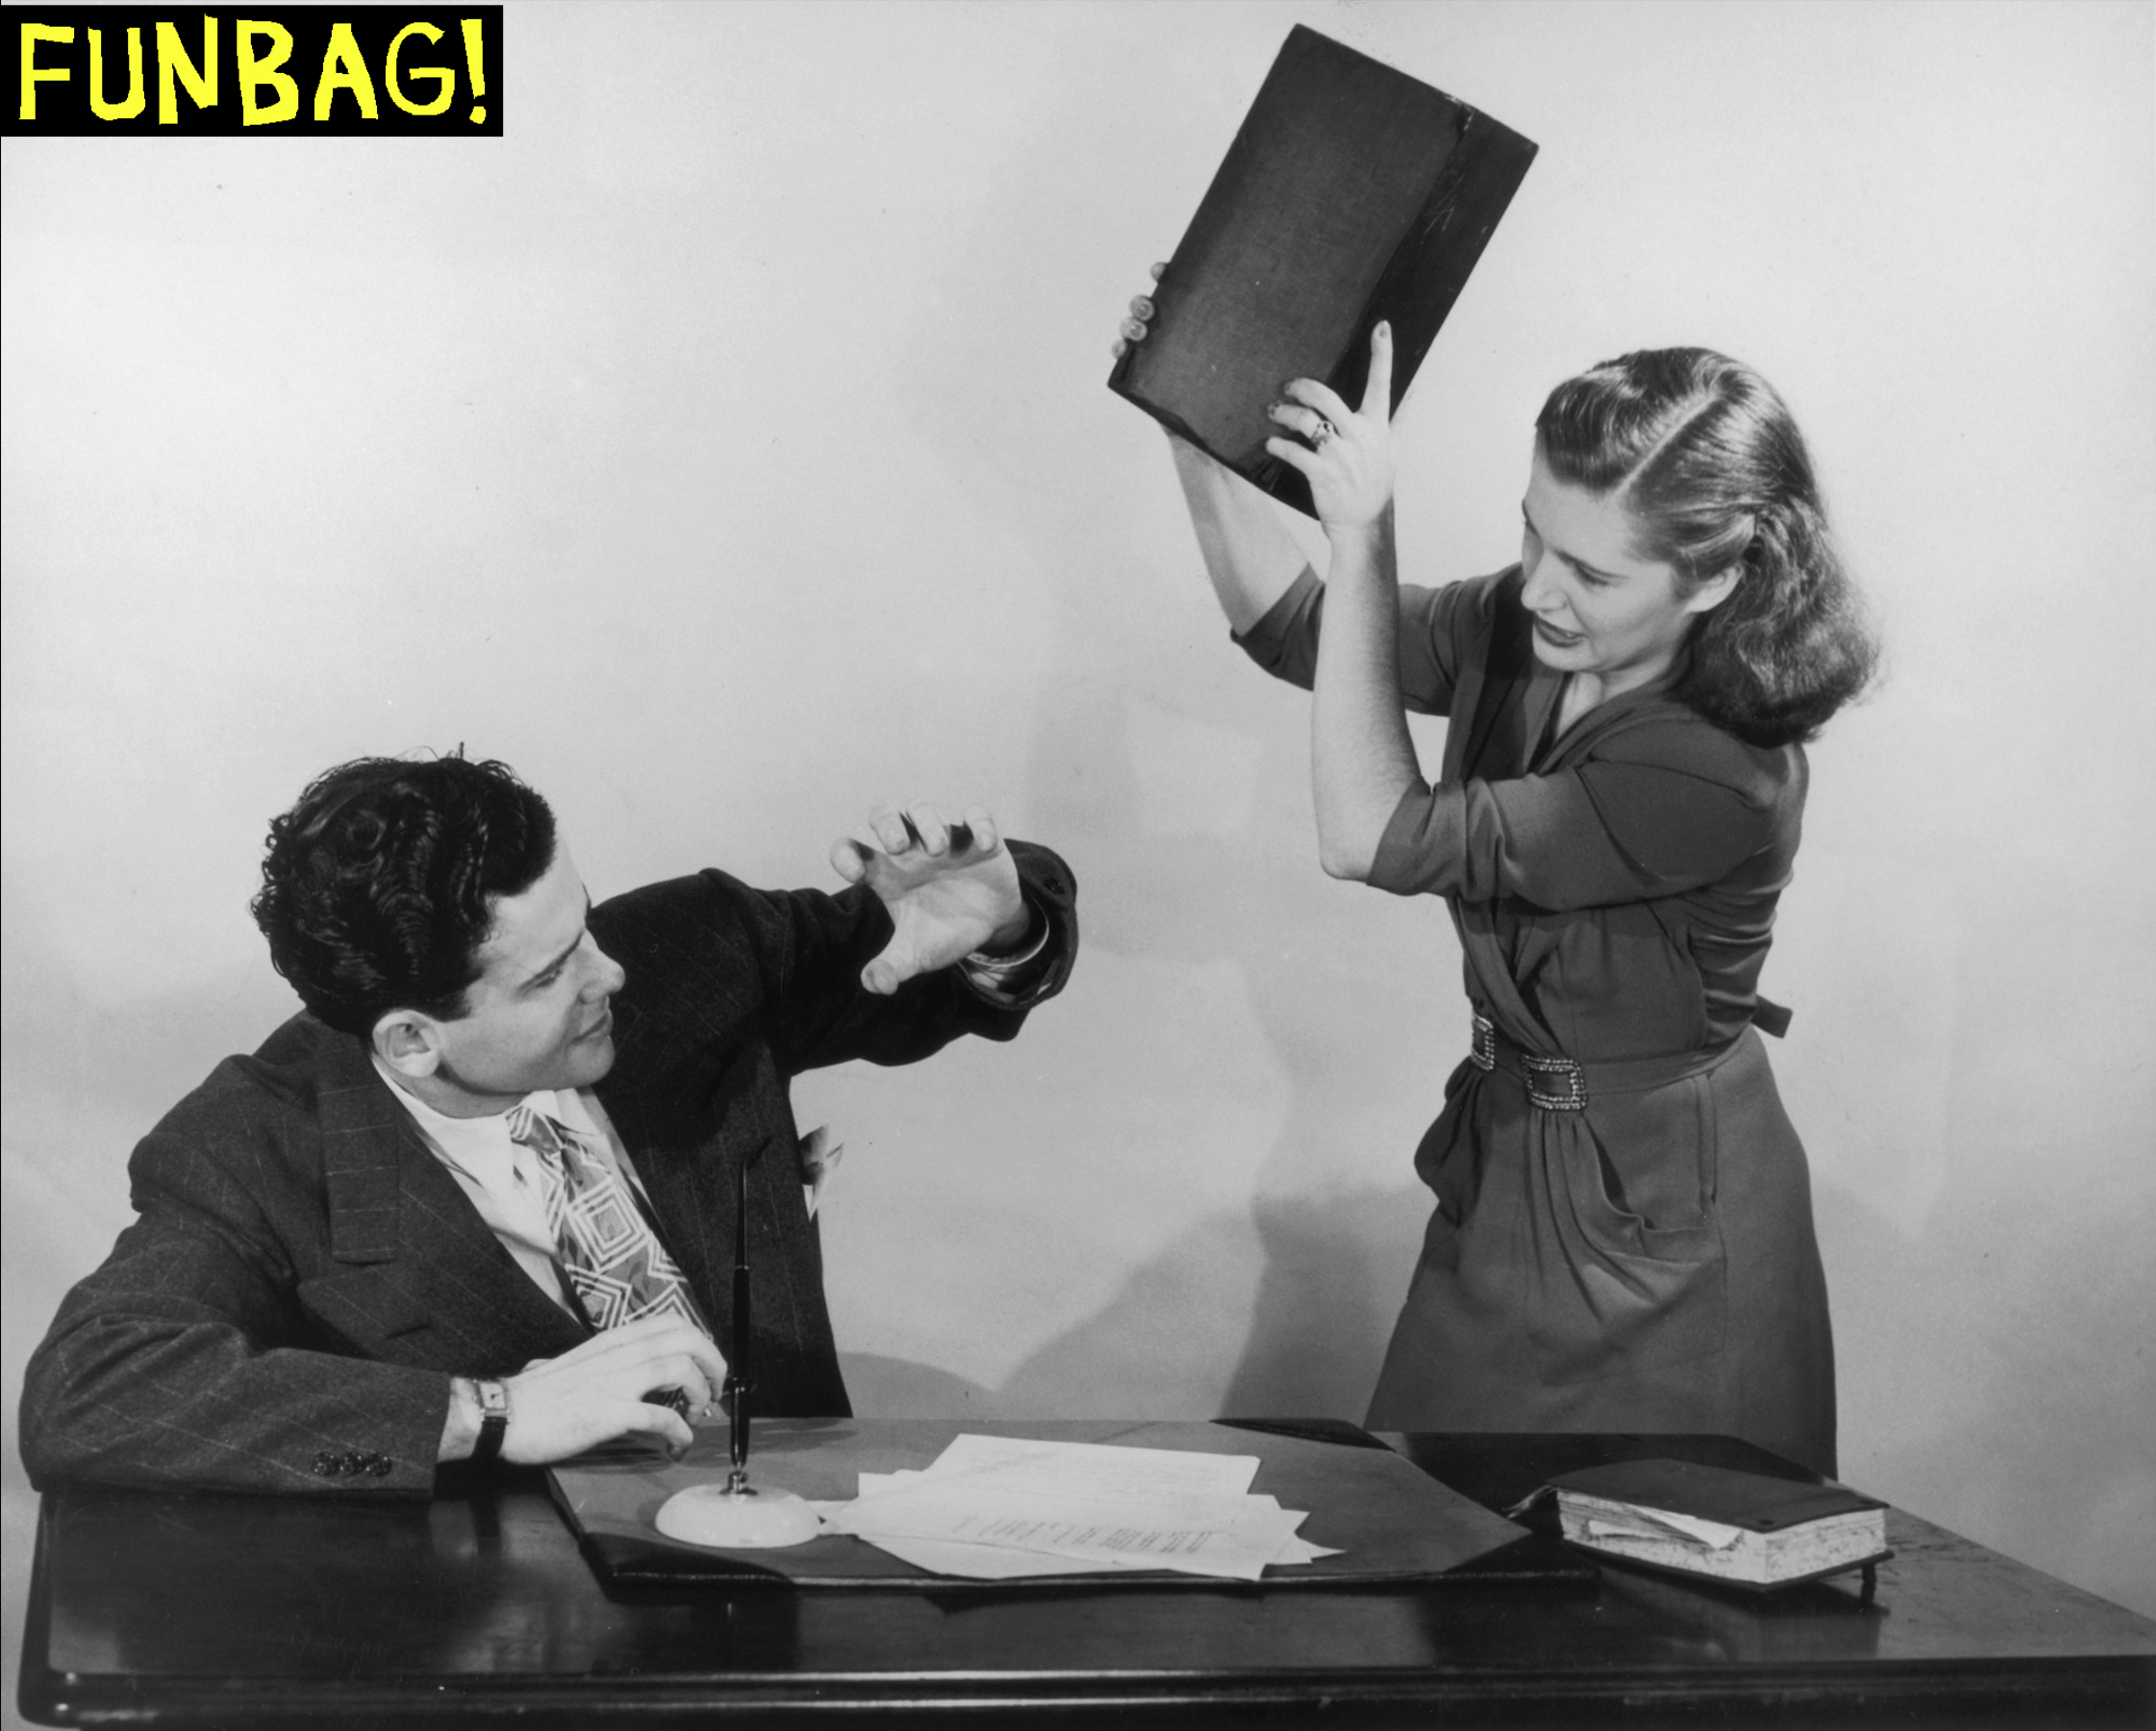 FUNBAG header art, it's a B&W image of a woman hitting a guy with a briefcase or book or something